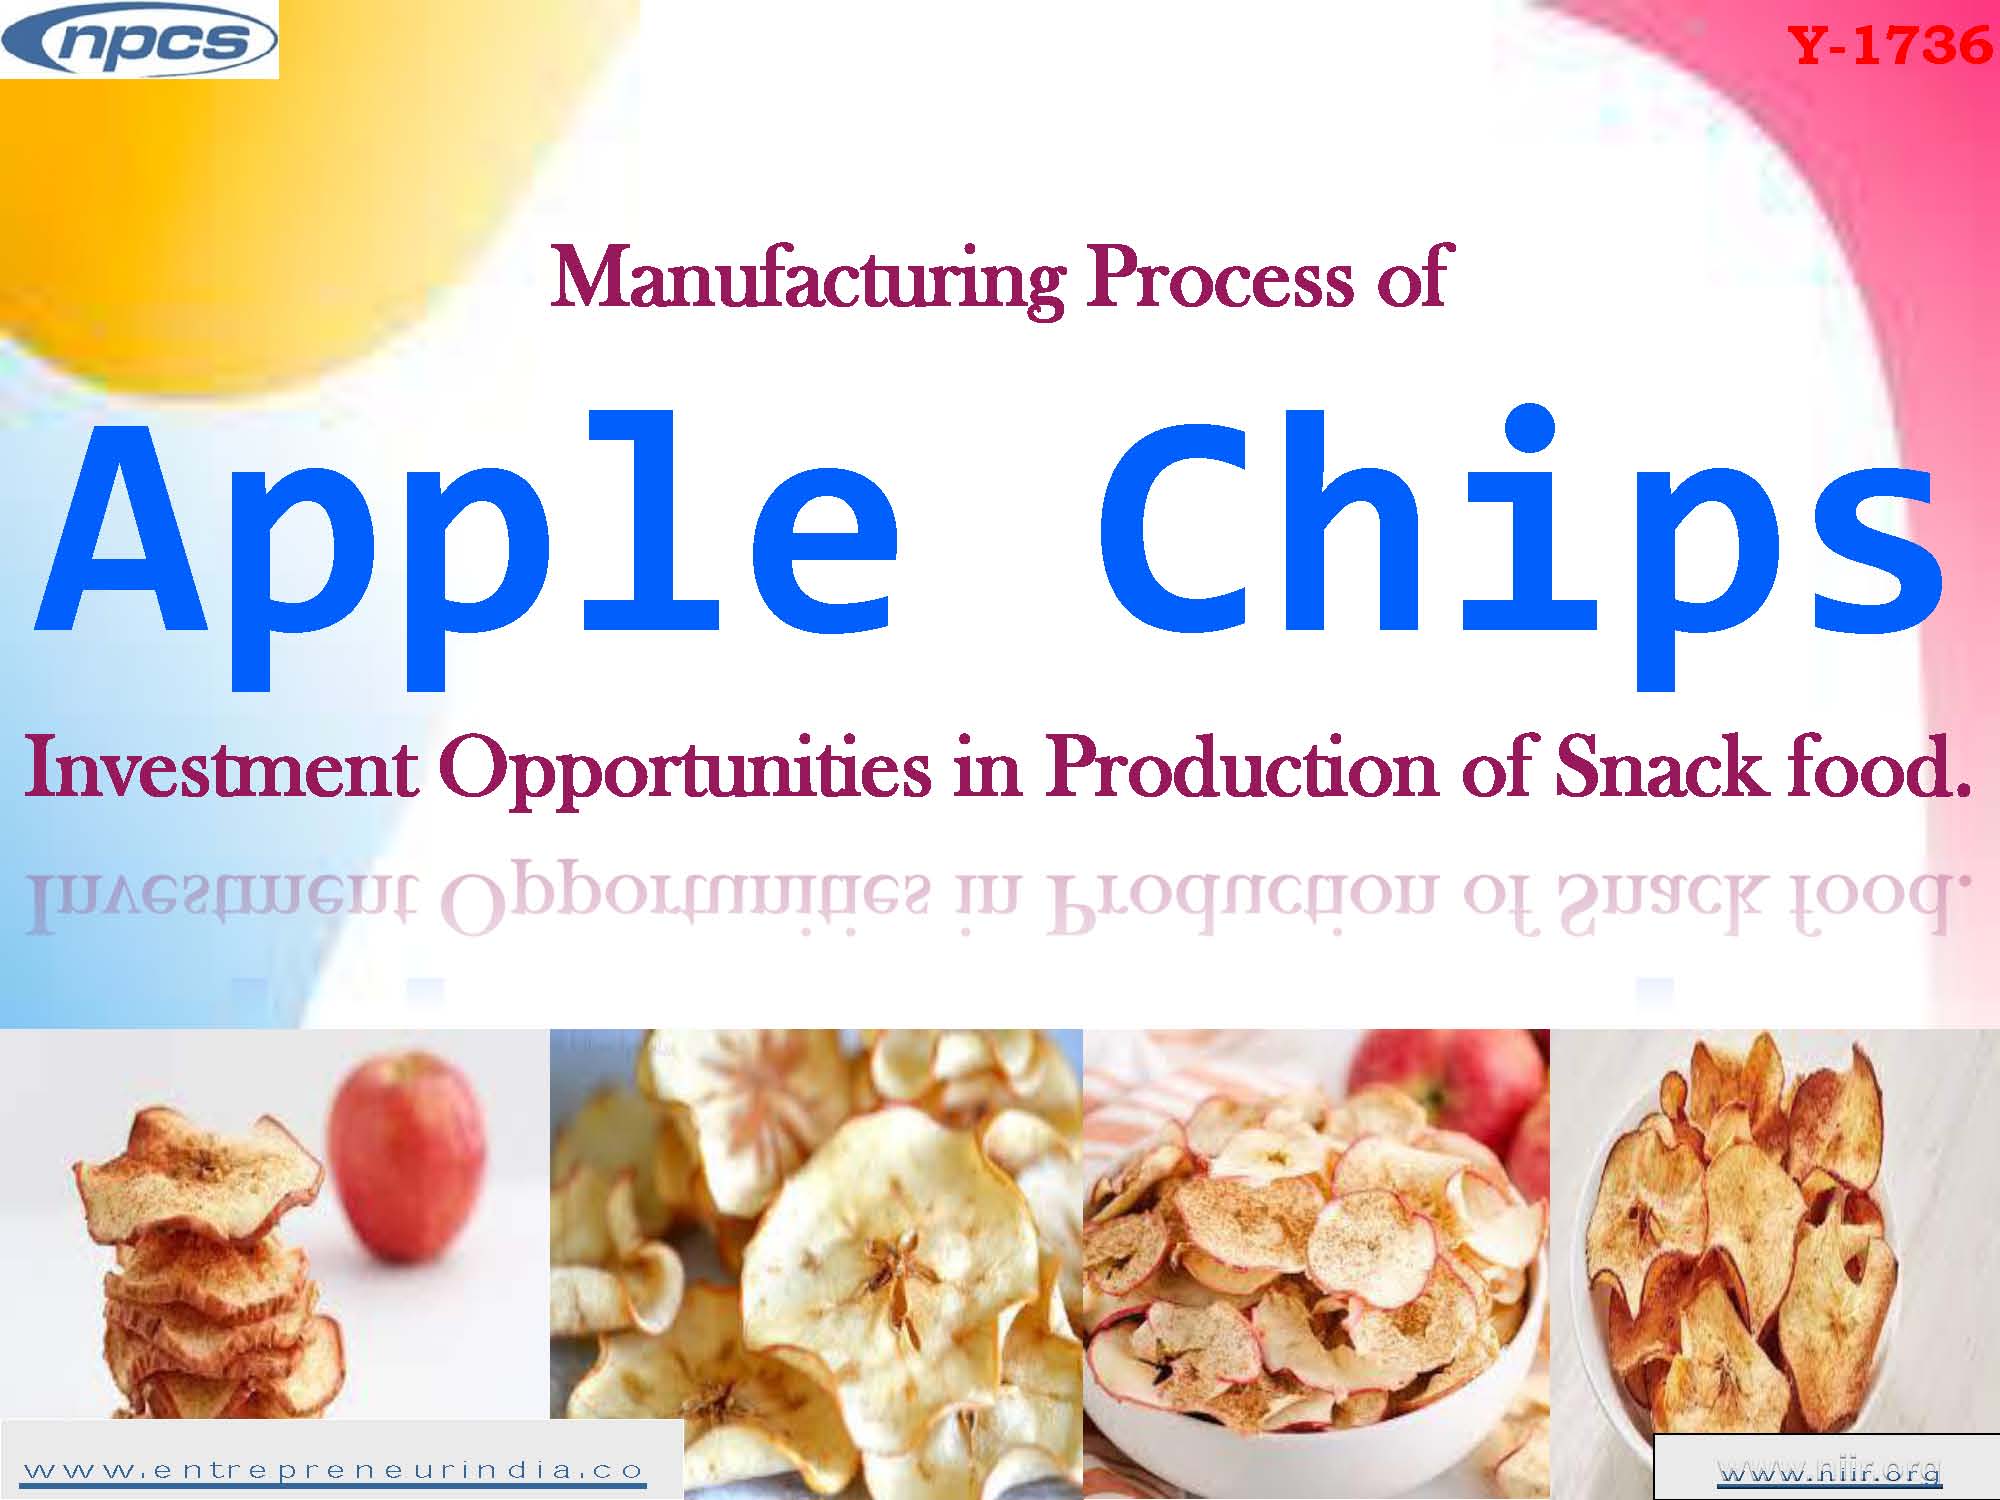 Manufacturing Process of Apple Chips Investment Opportunities in Production of Snack food